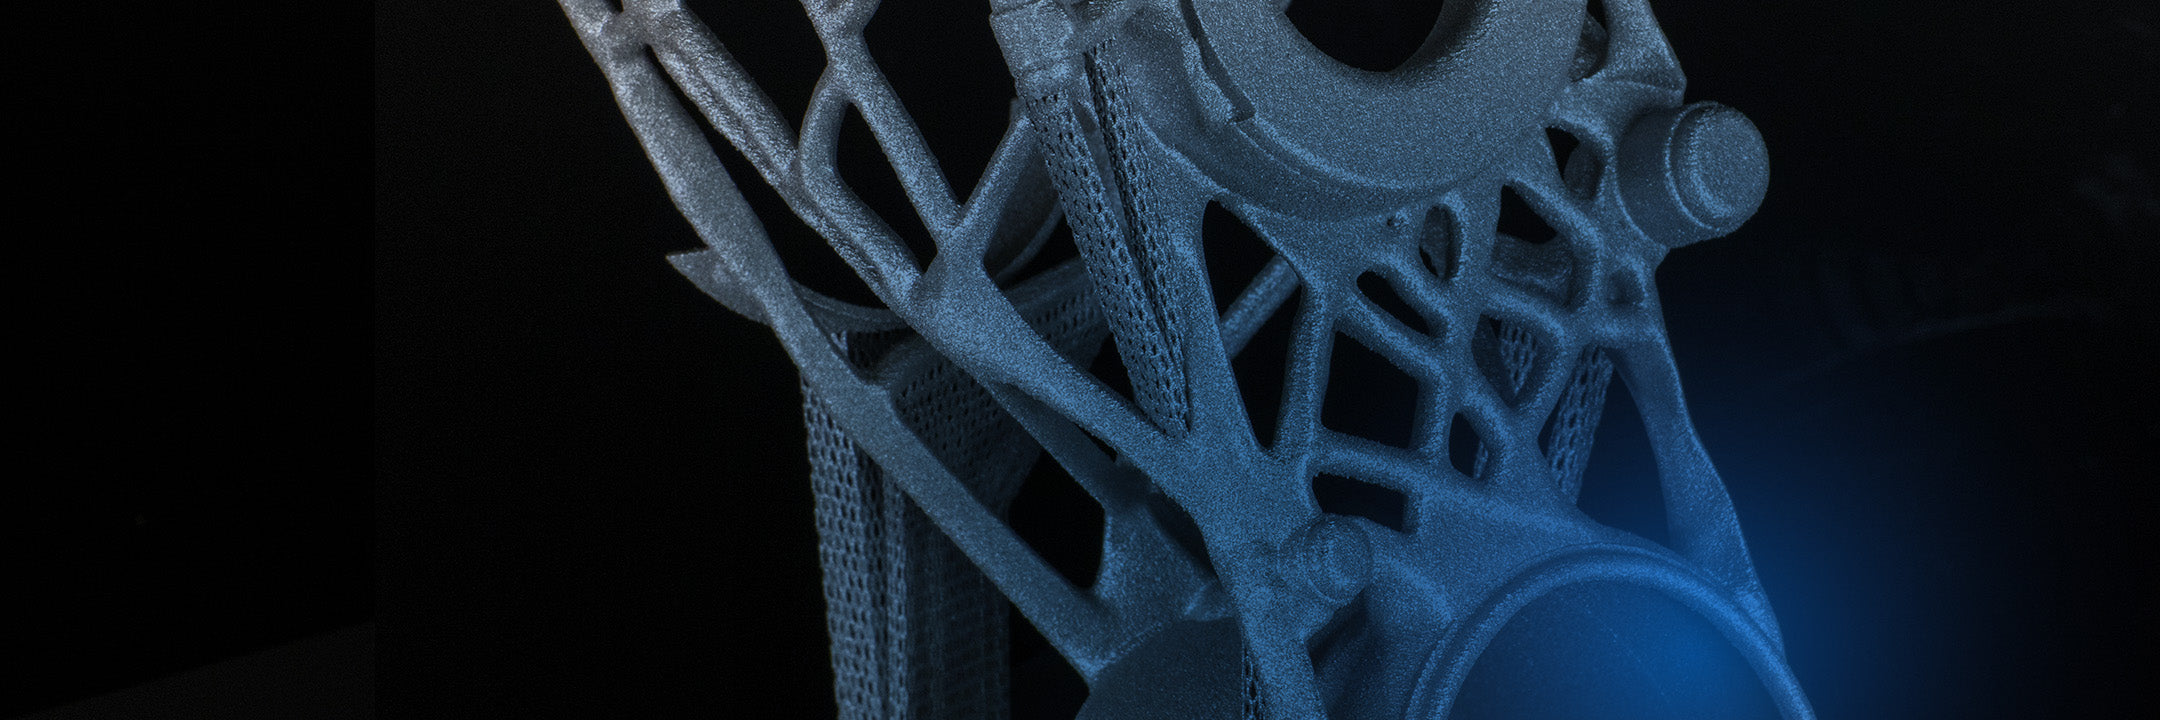 Join EOS support free campaign to know more about what does support-free means for additive manufacturing and metal 3D printing. 